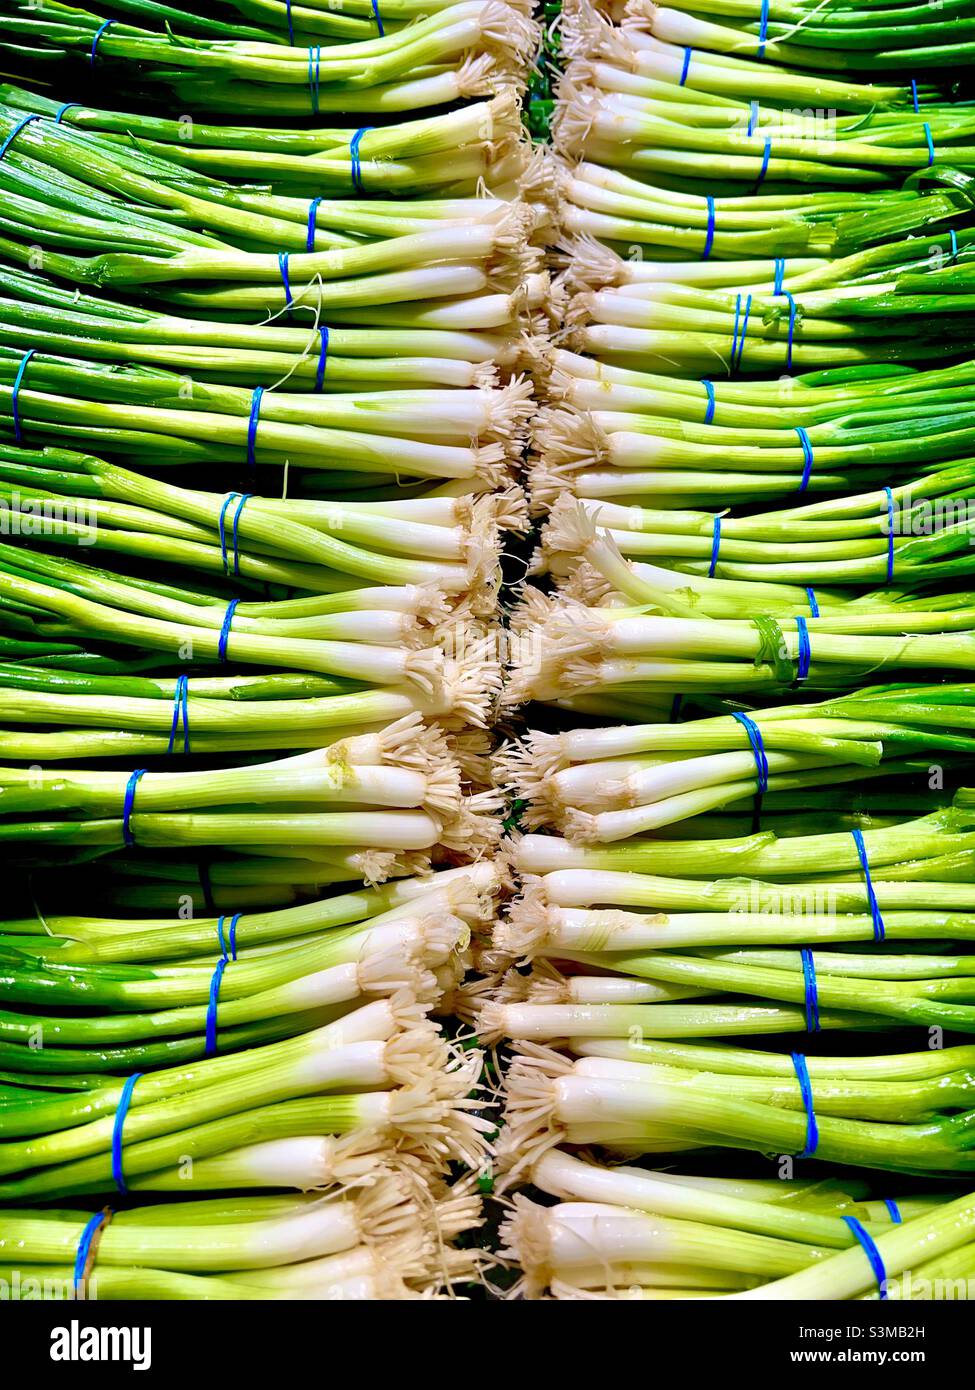 Bunches of green onion Stock Photo